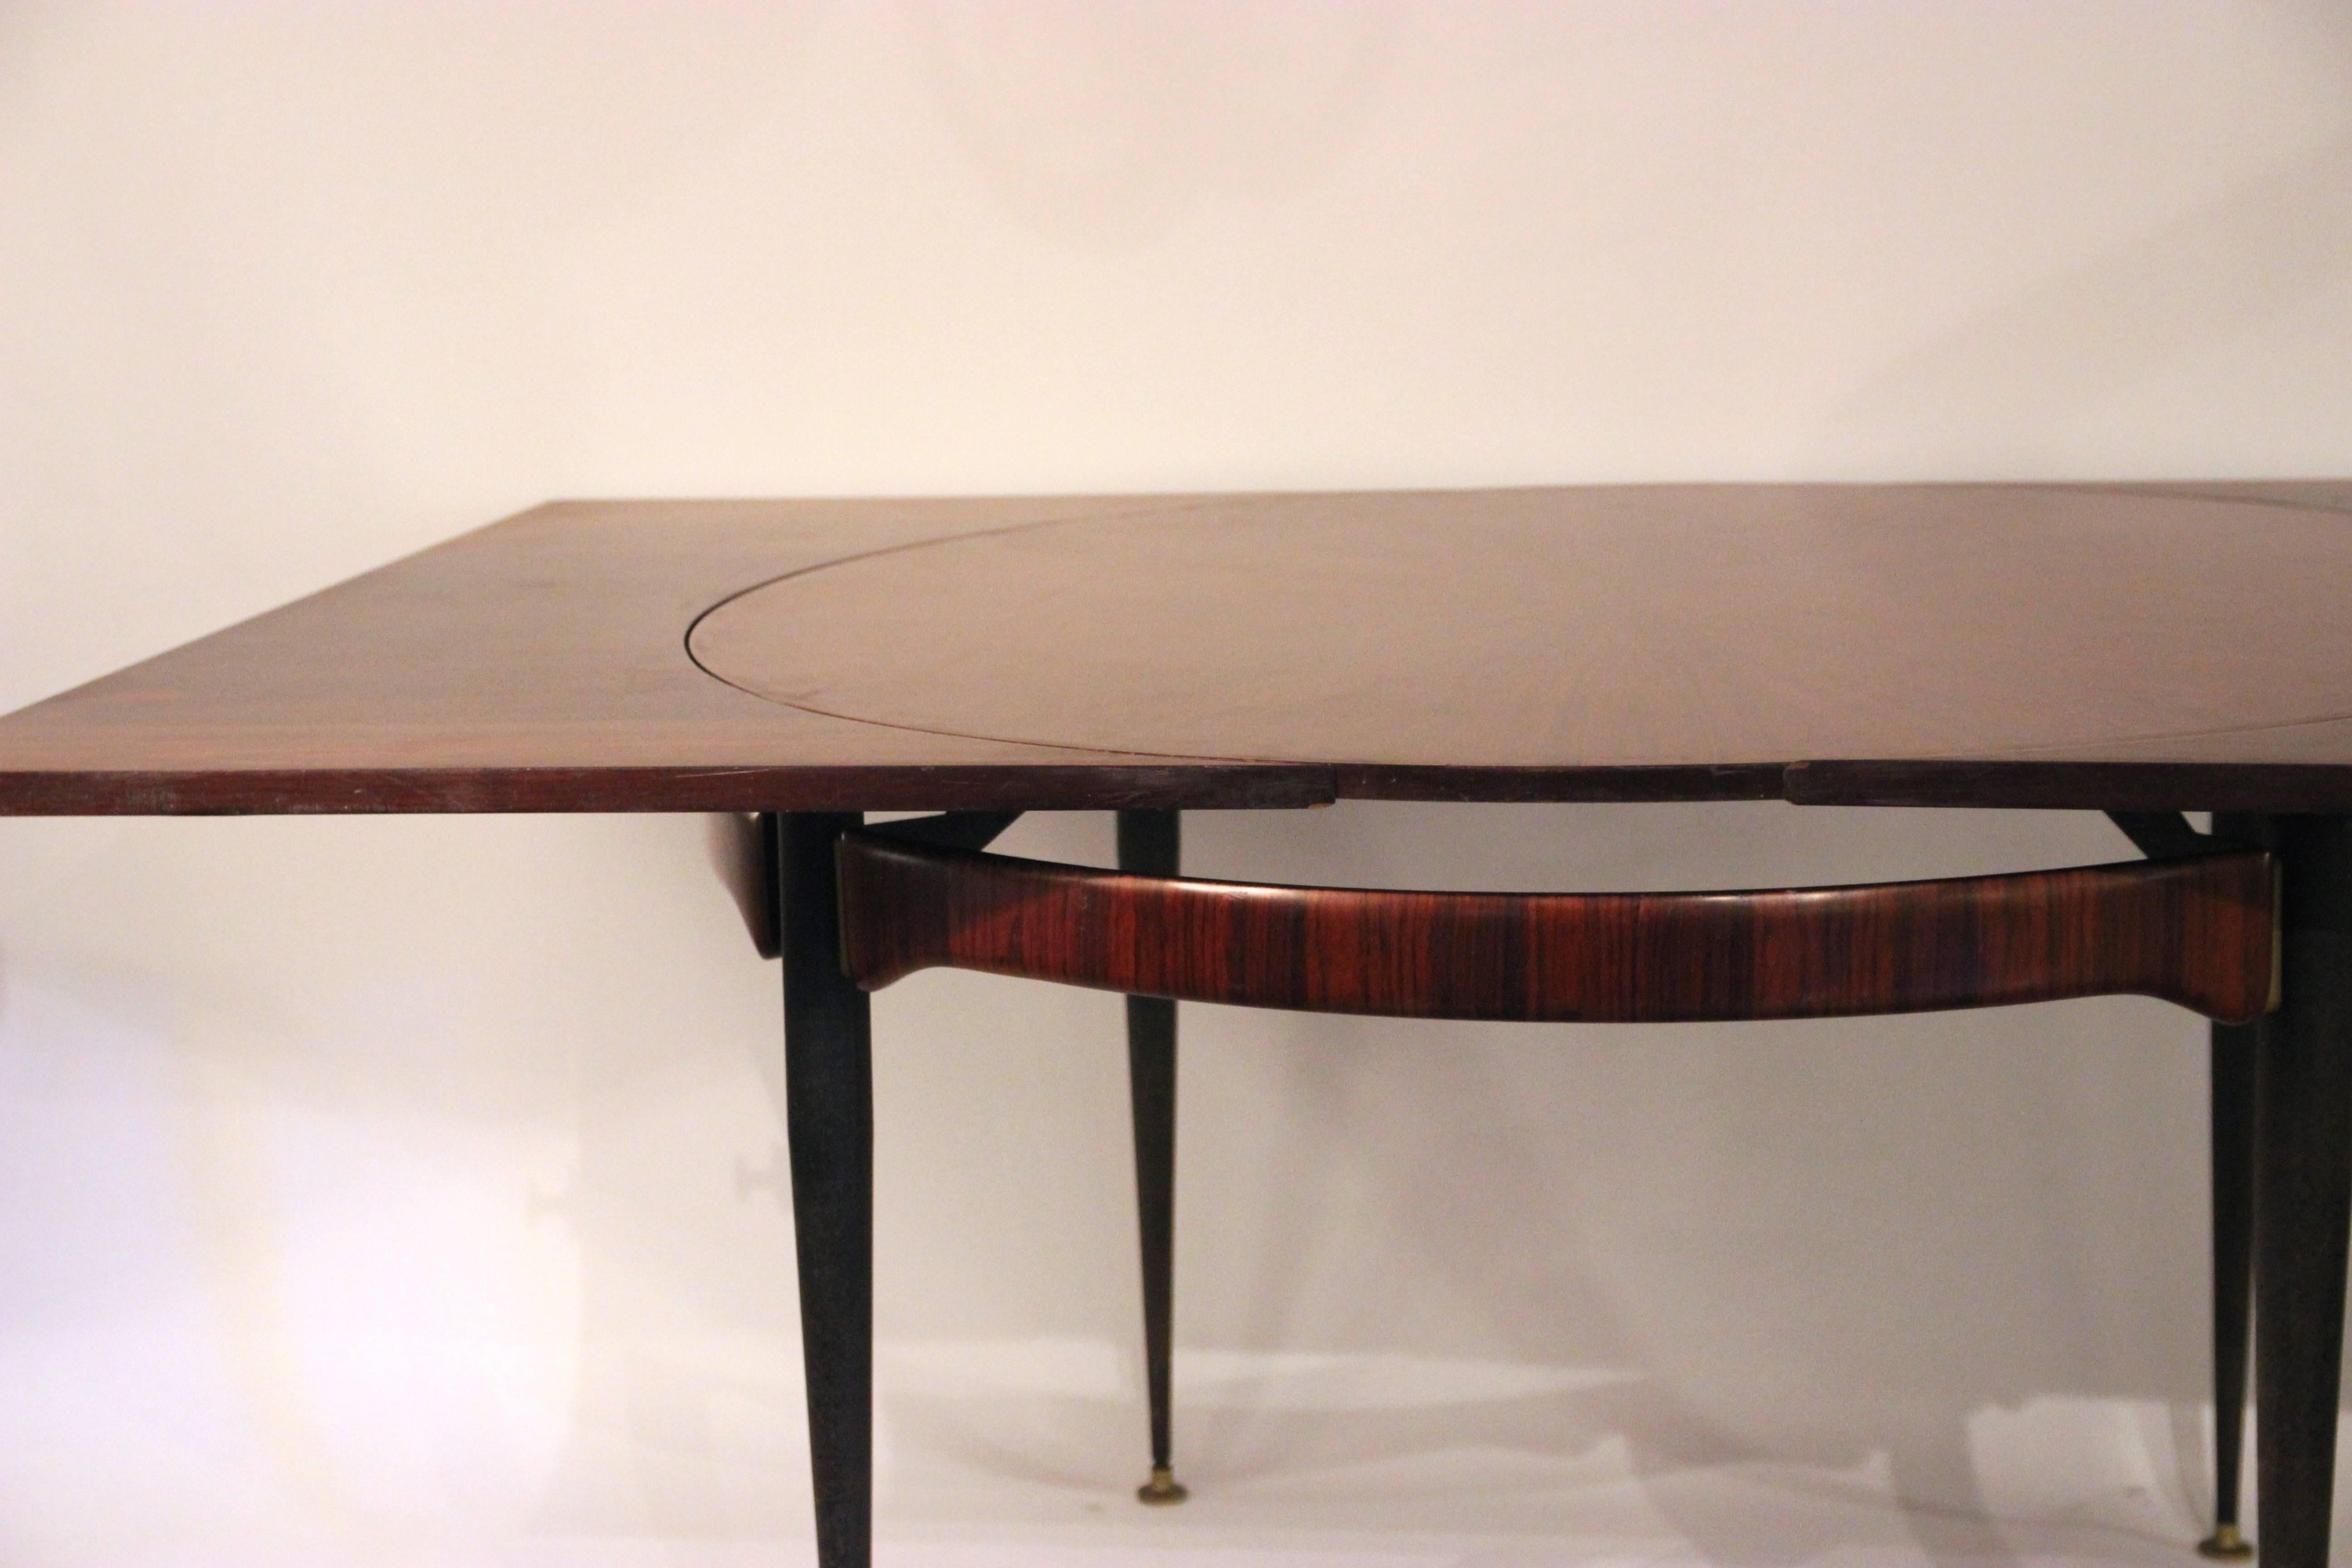 Attributed to Franco Albini (1905-1977),
Dining table (four covers without extension, eight with extensions),
Rosewood, iron and gilded brass,
circa 1970, Italy.
Round table without extension: Diameter 120 cm, height 74 cm,
table with